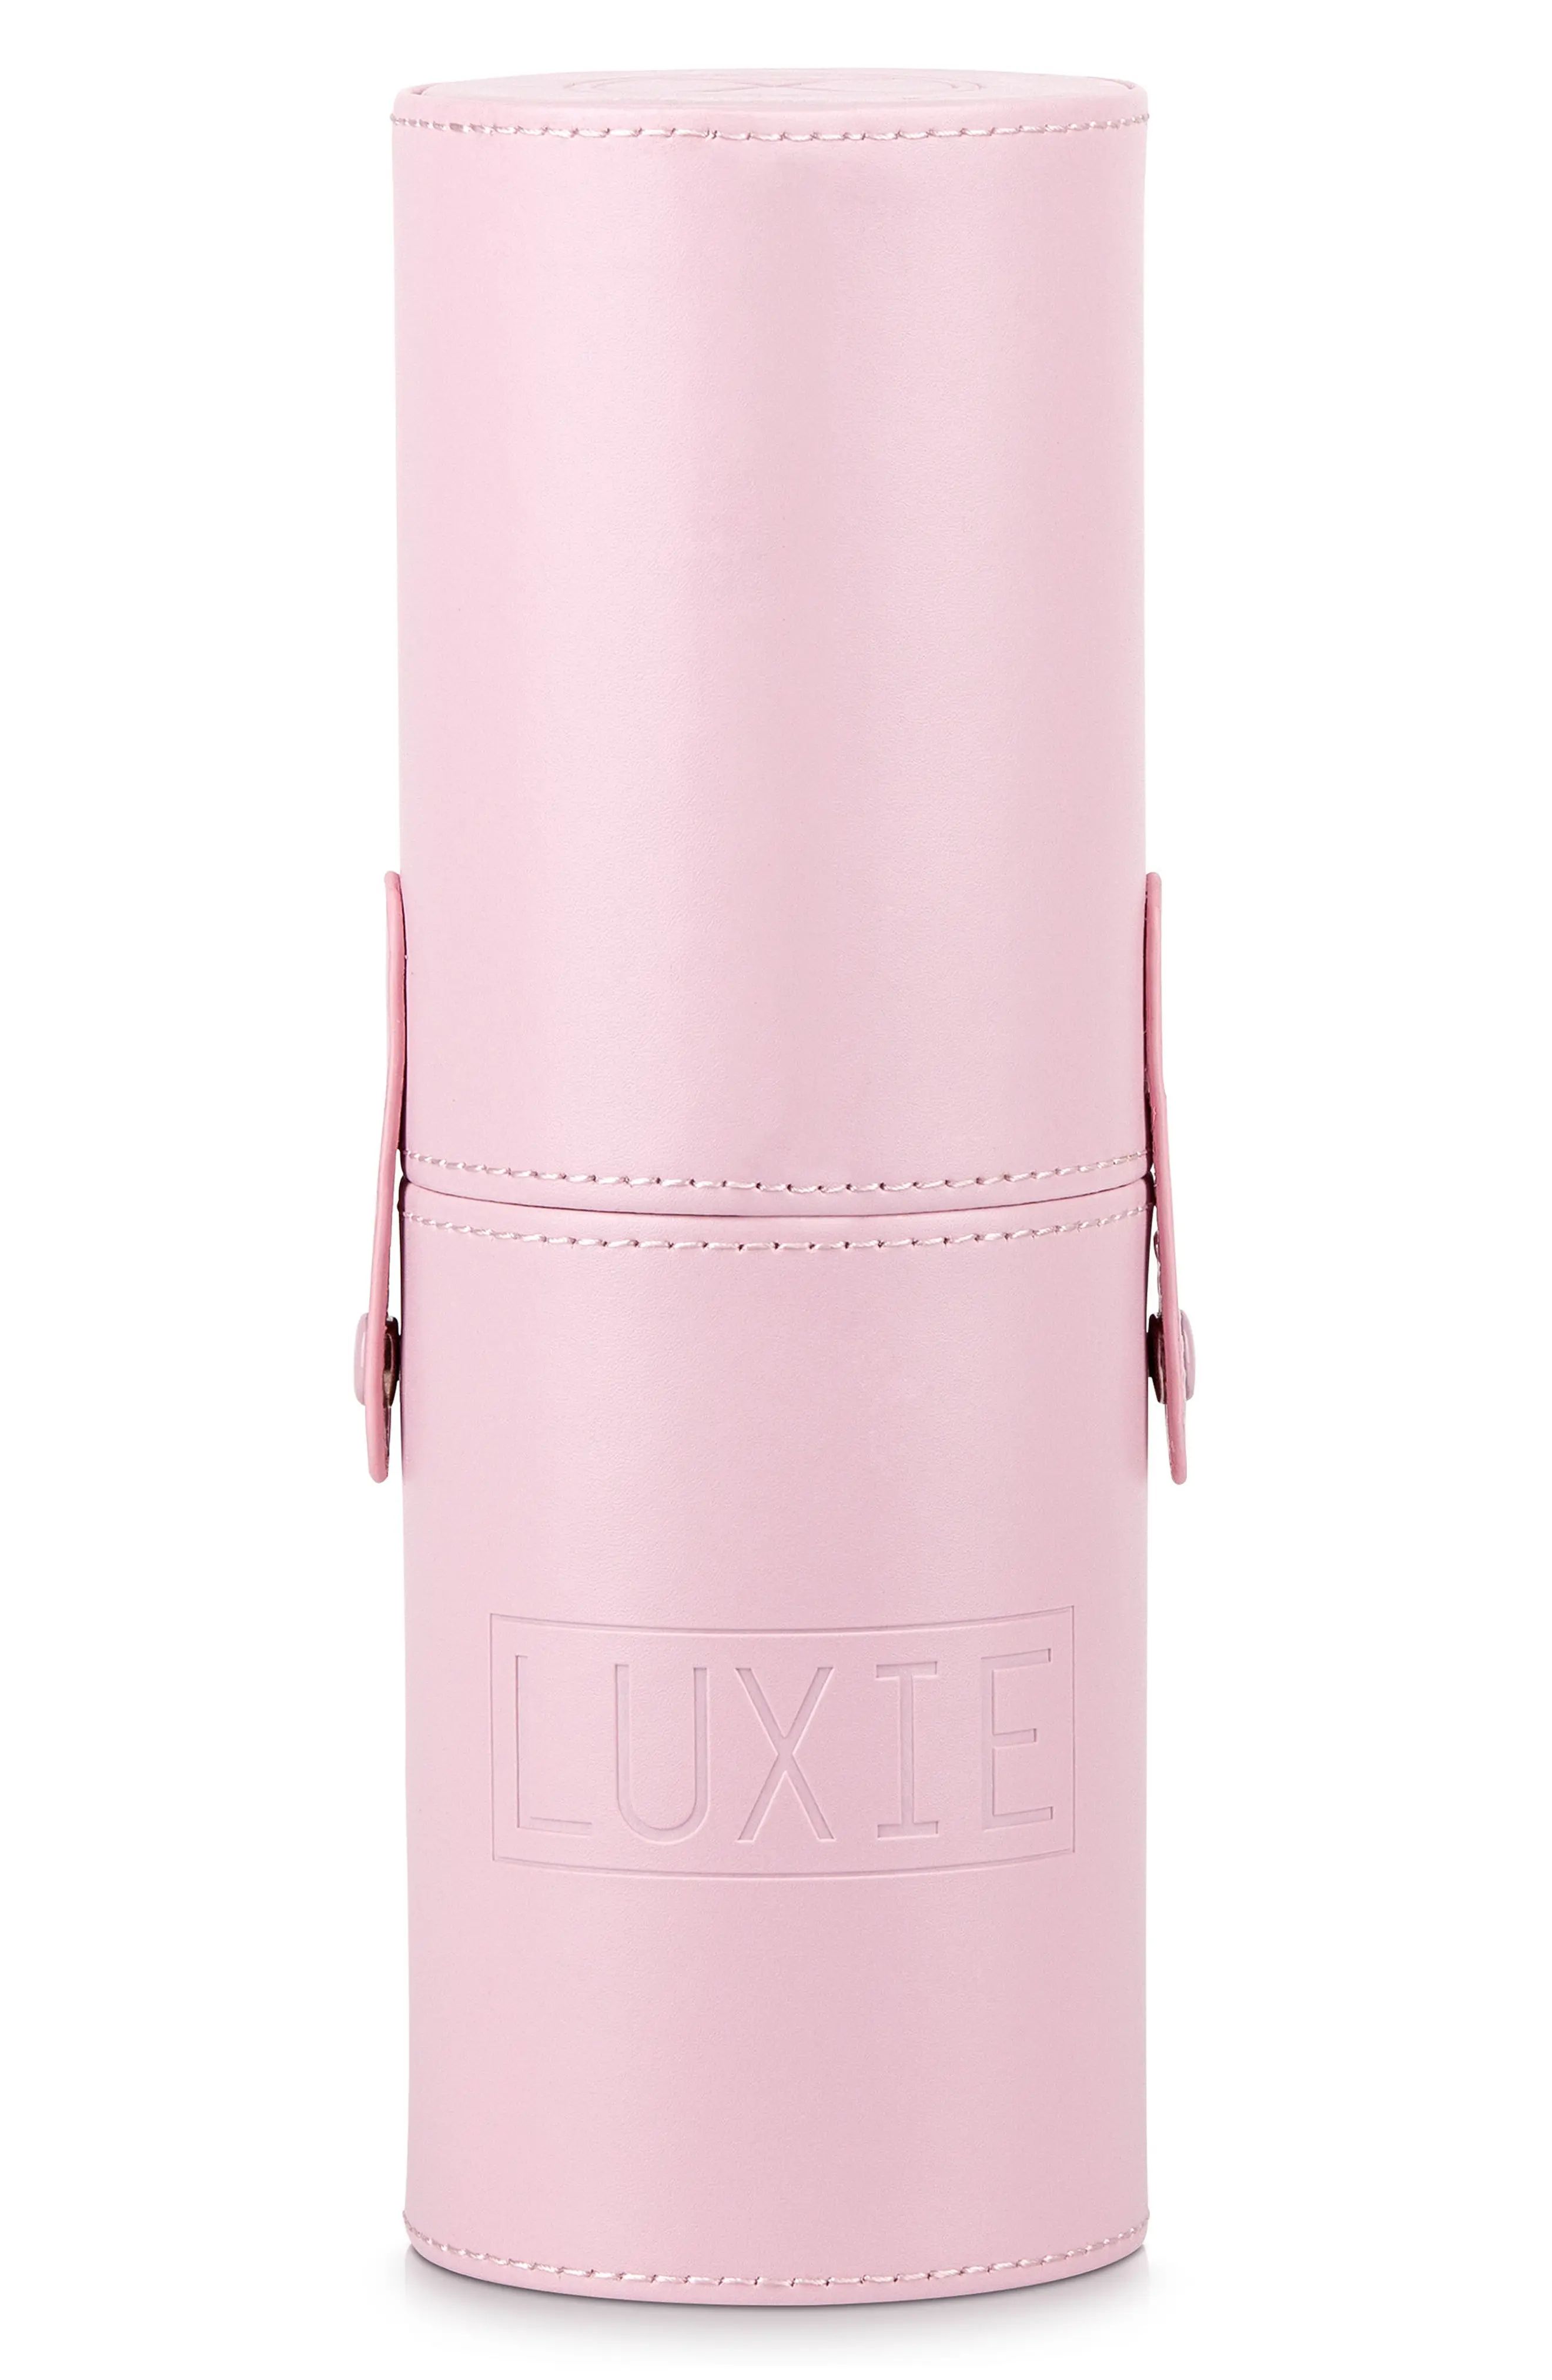 Luxie Pink Perfection Brush Cup Holder, Size One Size - No Color | Nordstrom